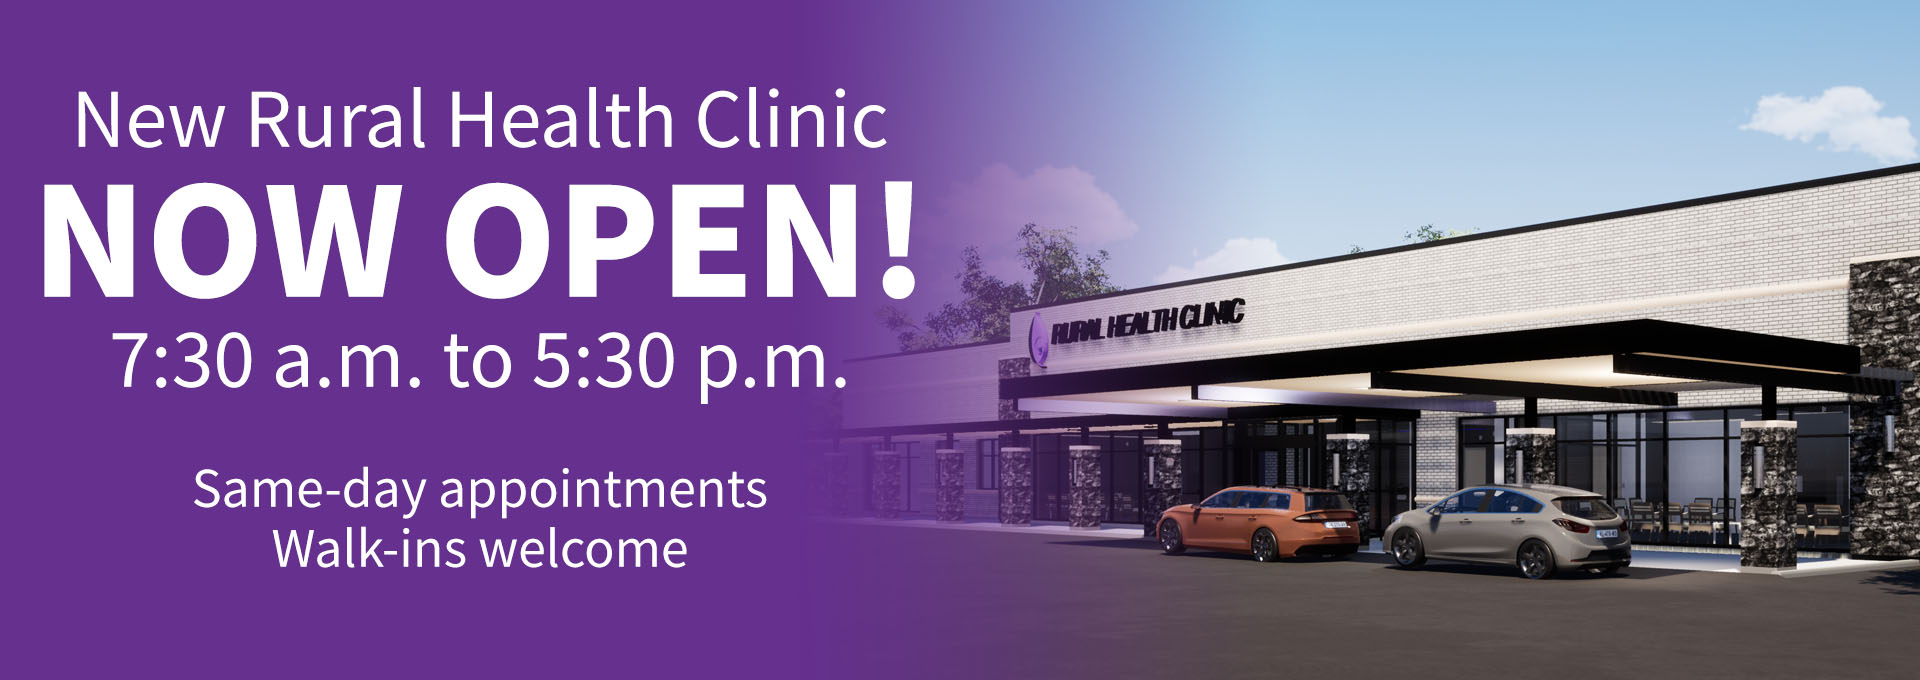 New Rural Health Clinic Now Open!